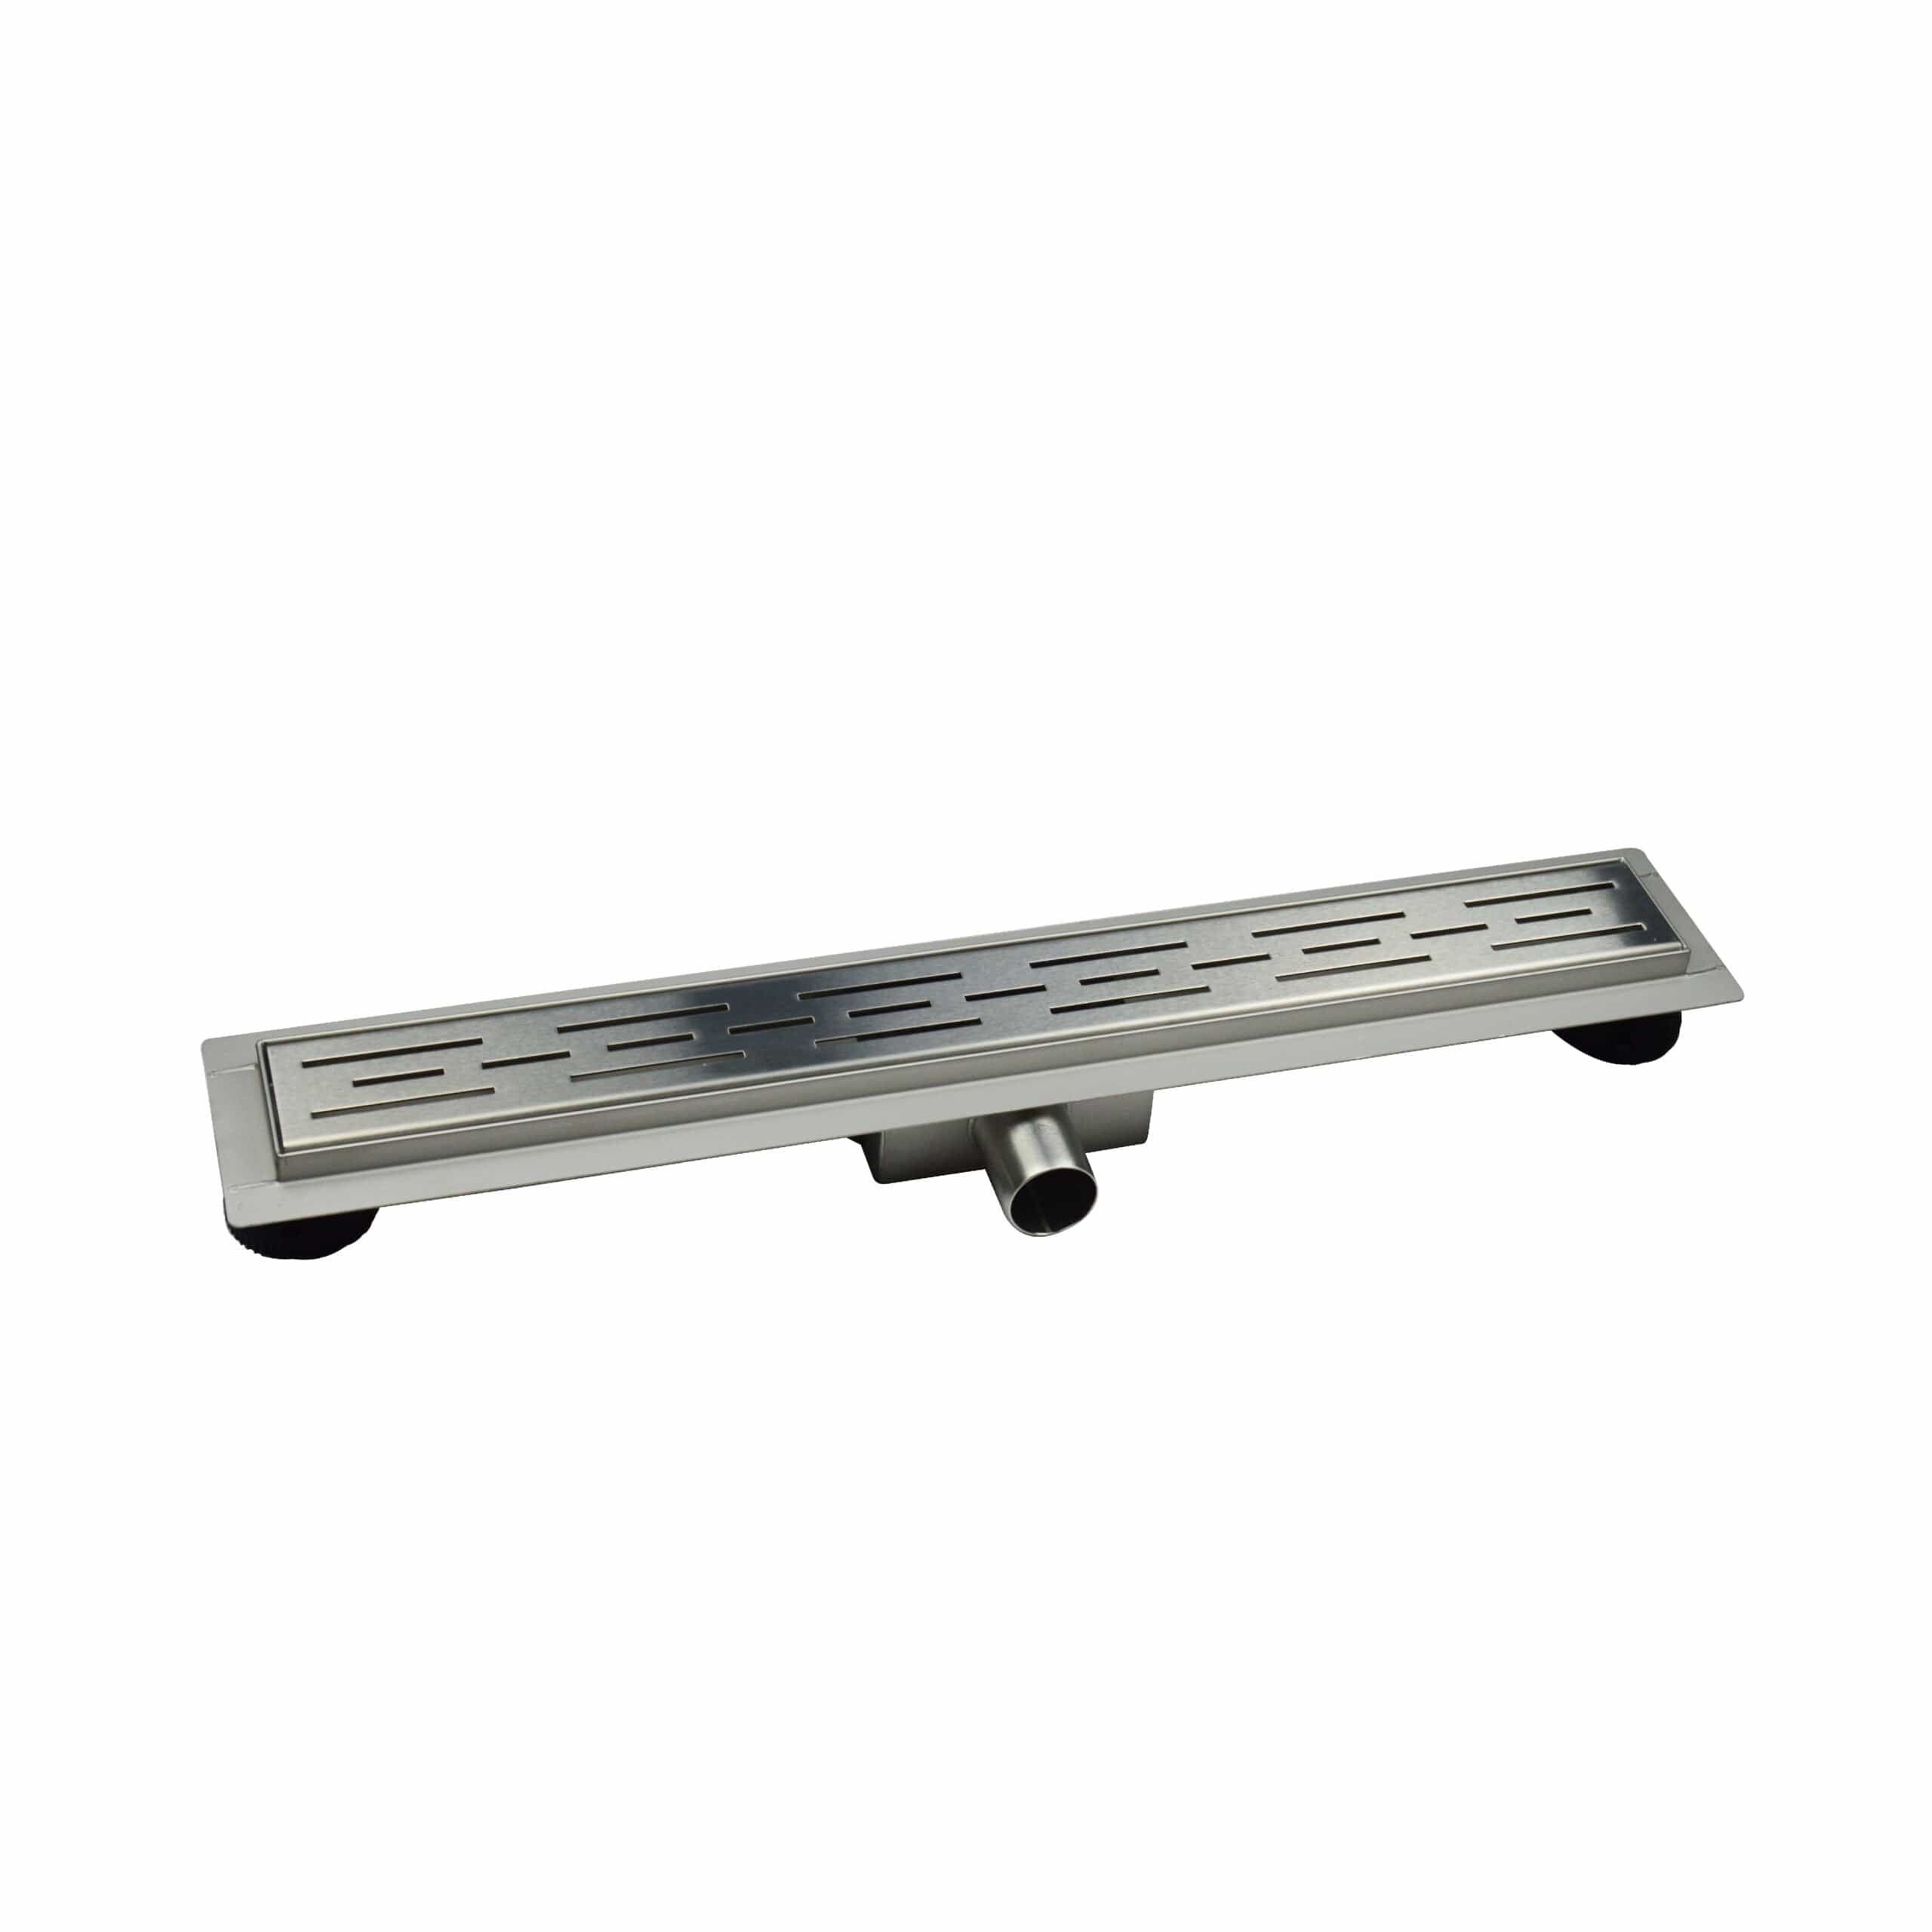 Tredex Linear Drain With Horizontal Outlet (P-trap) 600X70X67mm | Supply Master | Accra, Ghana Bathroom Accessories Buy Tools hardware Building materials